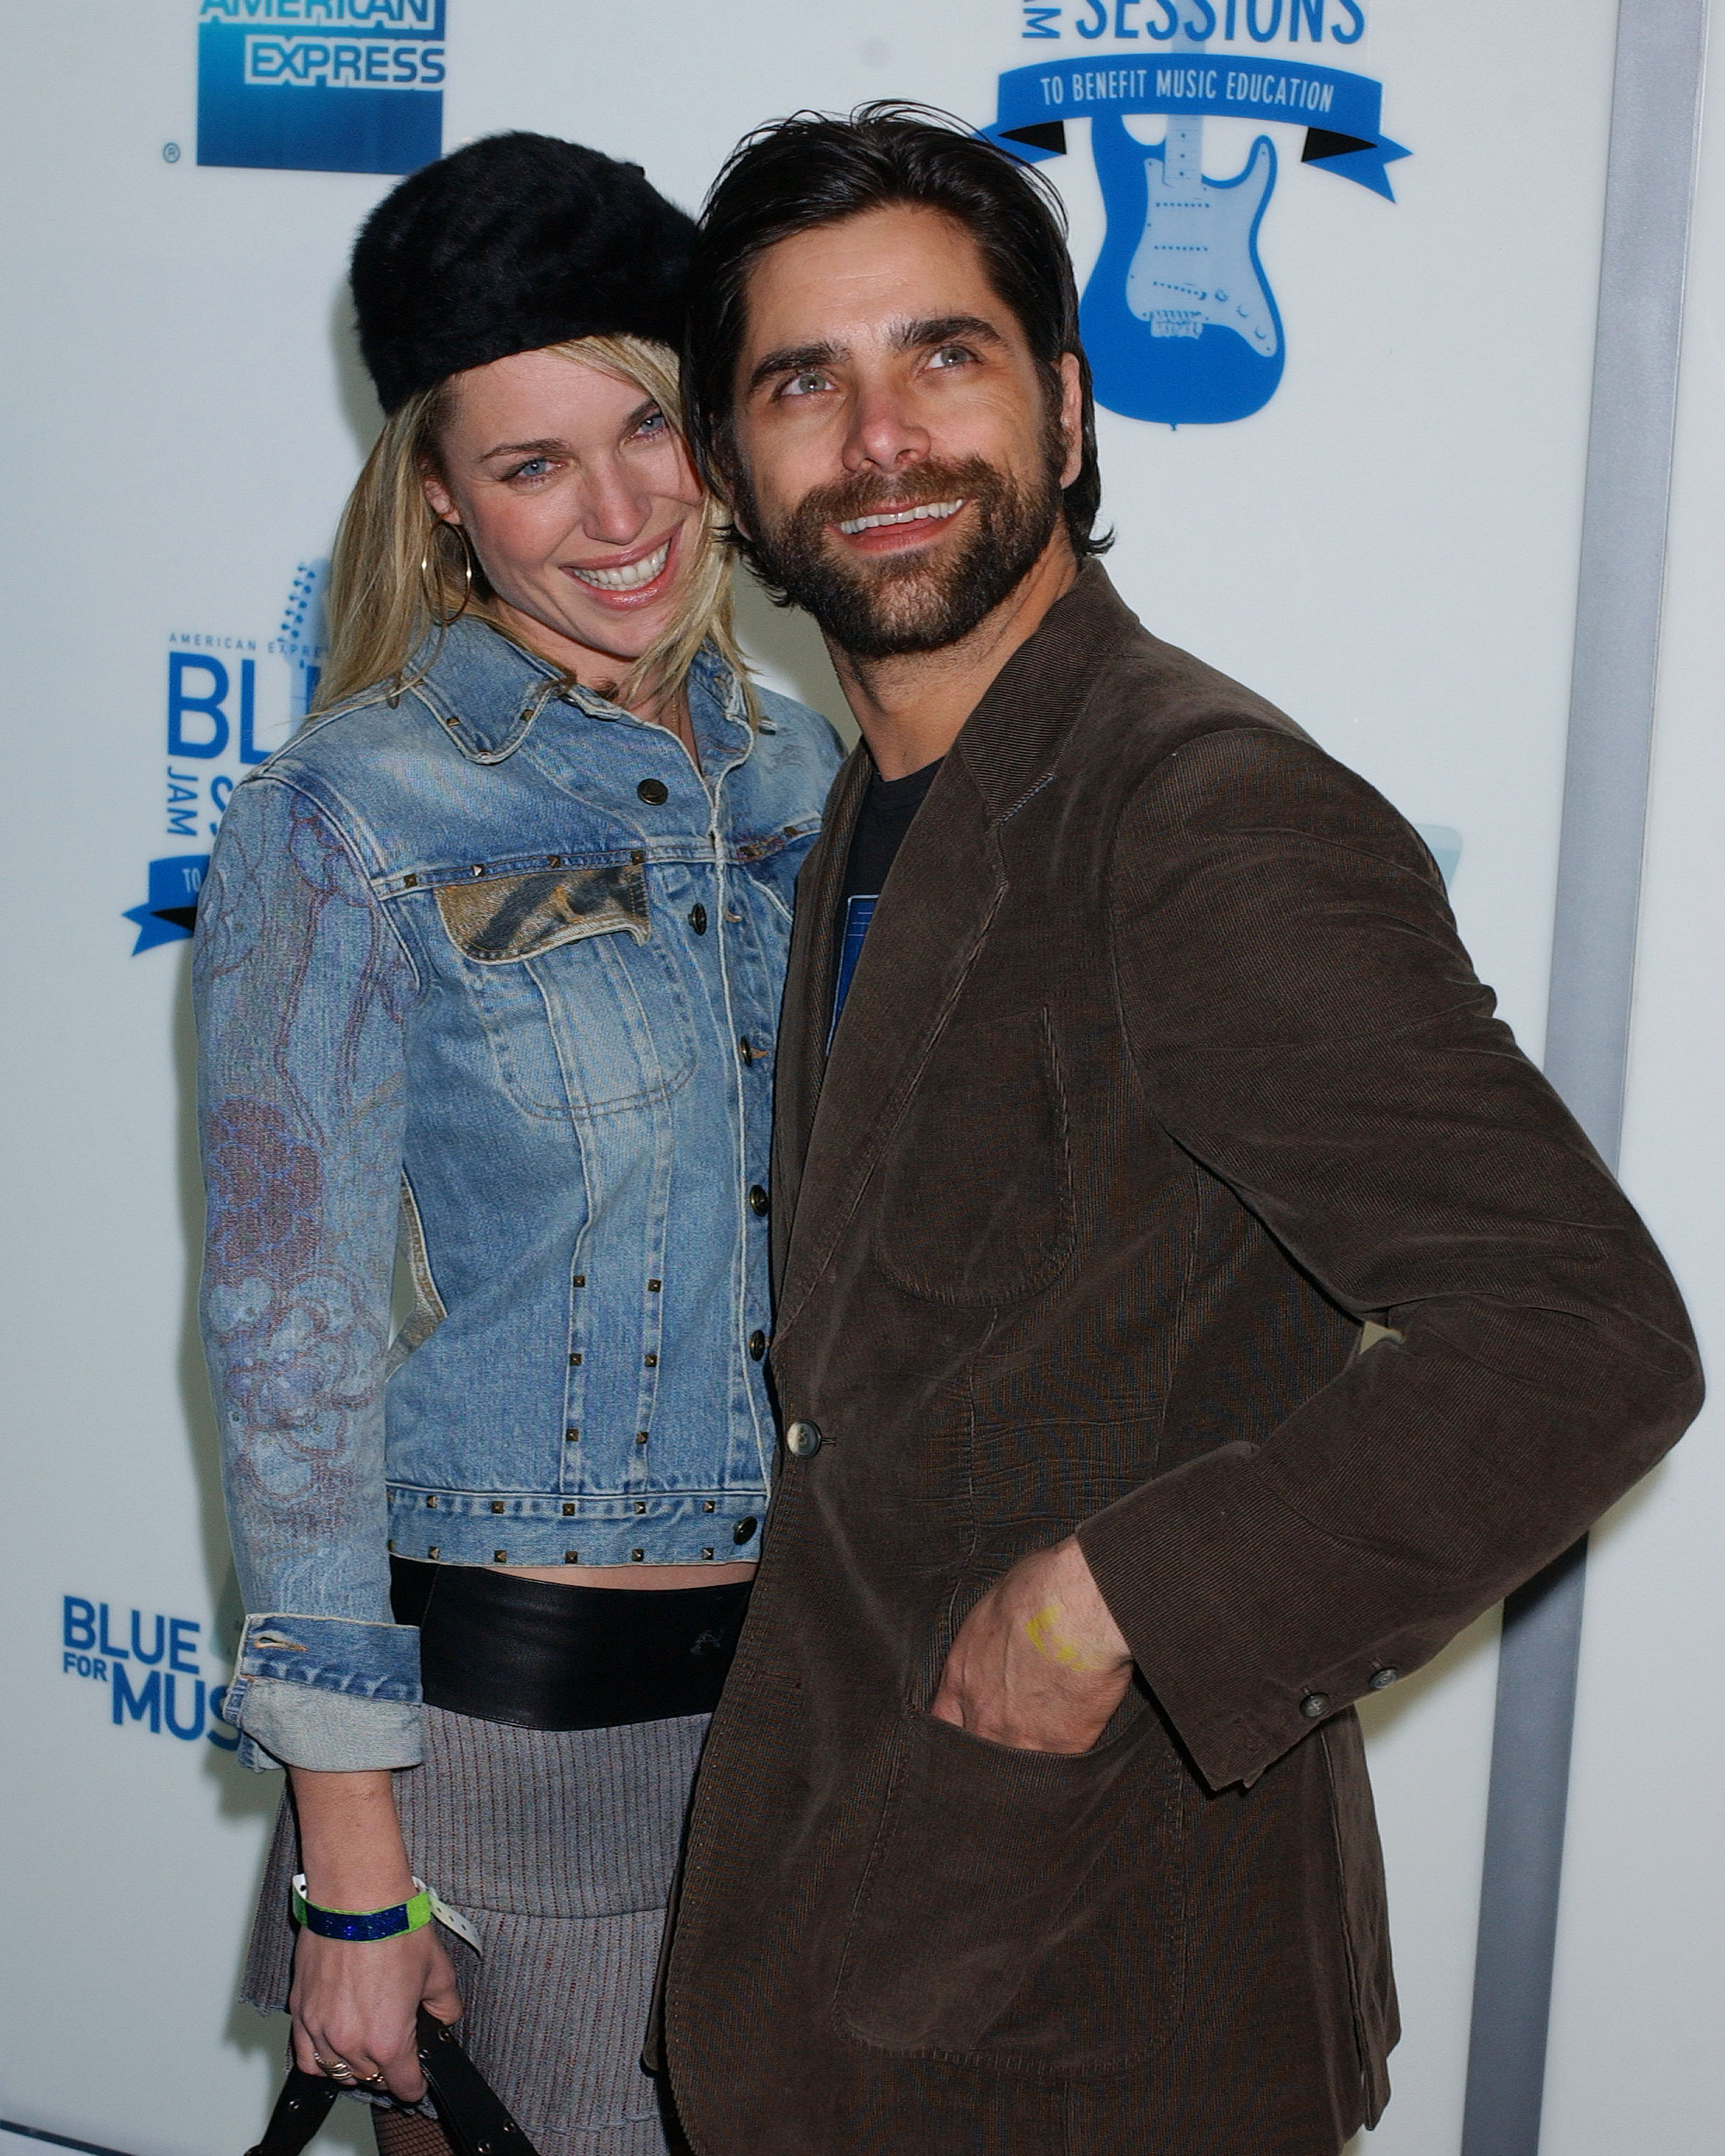 They&#x27;re both smiling at a media event; she&#x27;s wearing a hat and denim jacket, and he&#x27;s wearing a short coat